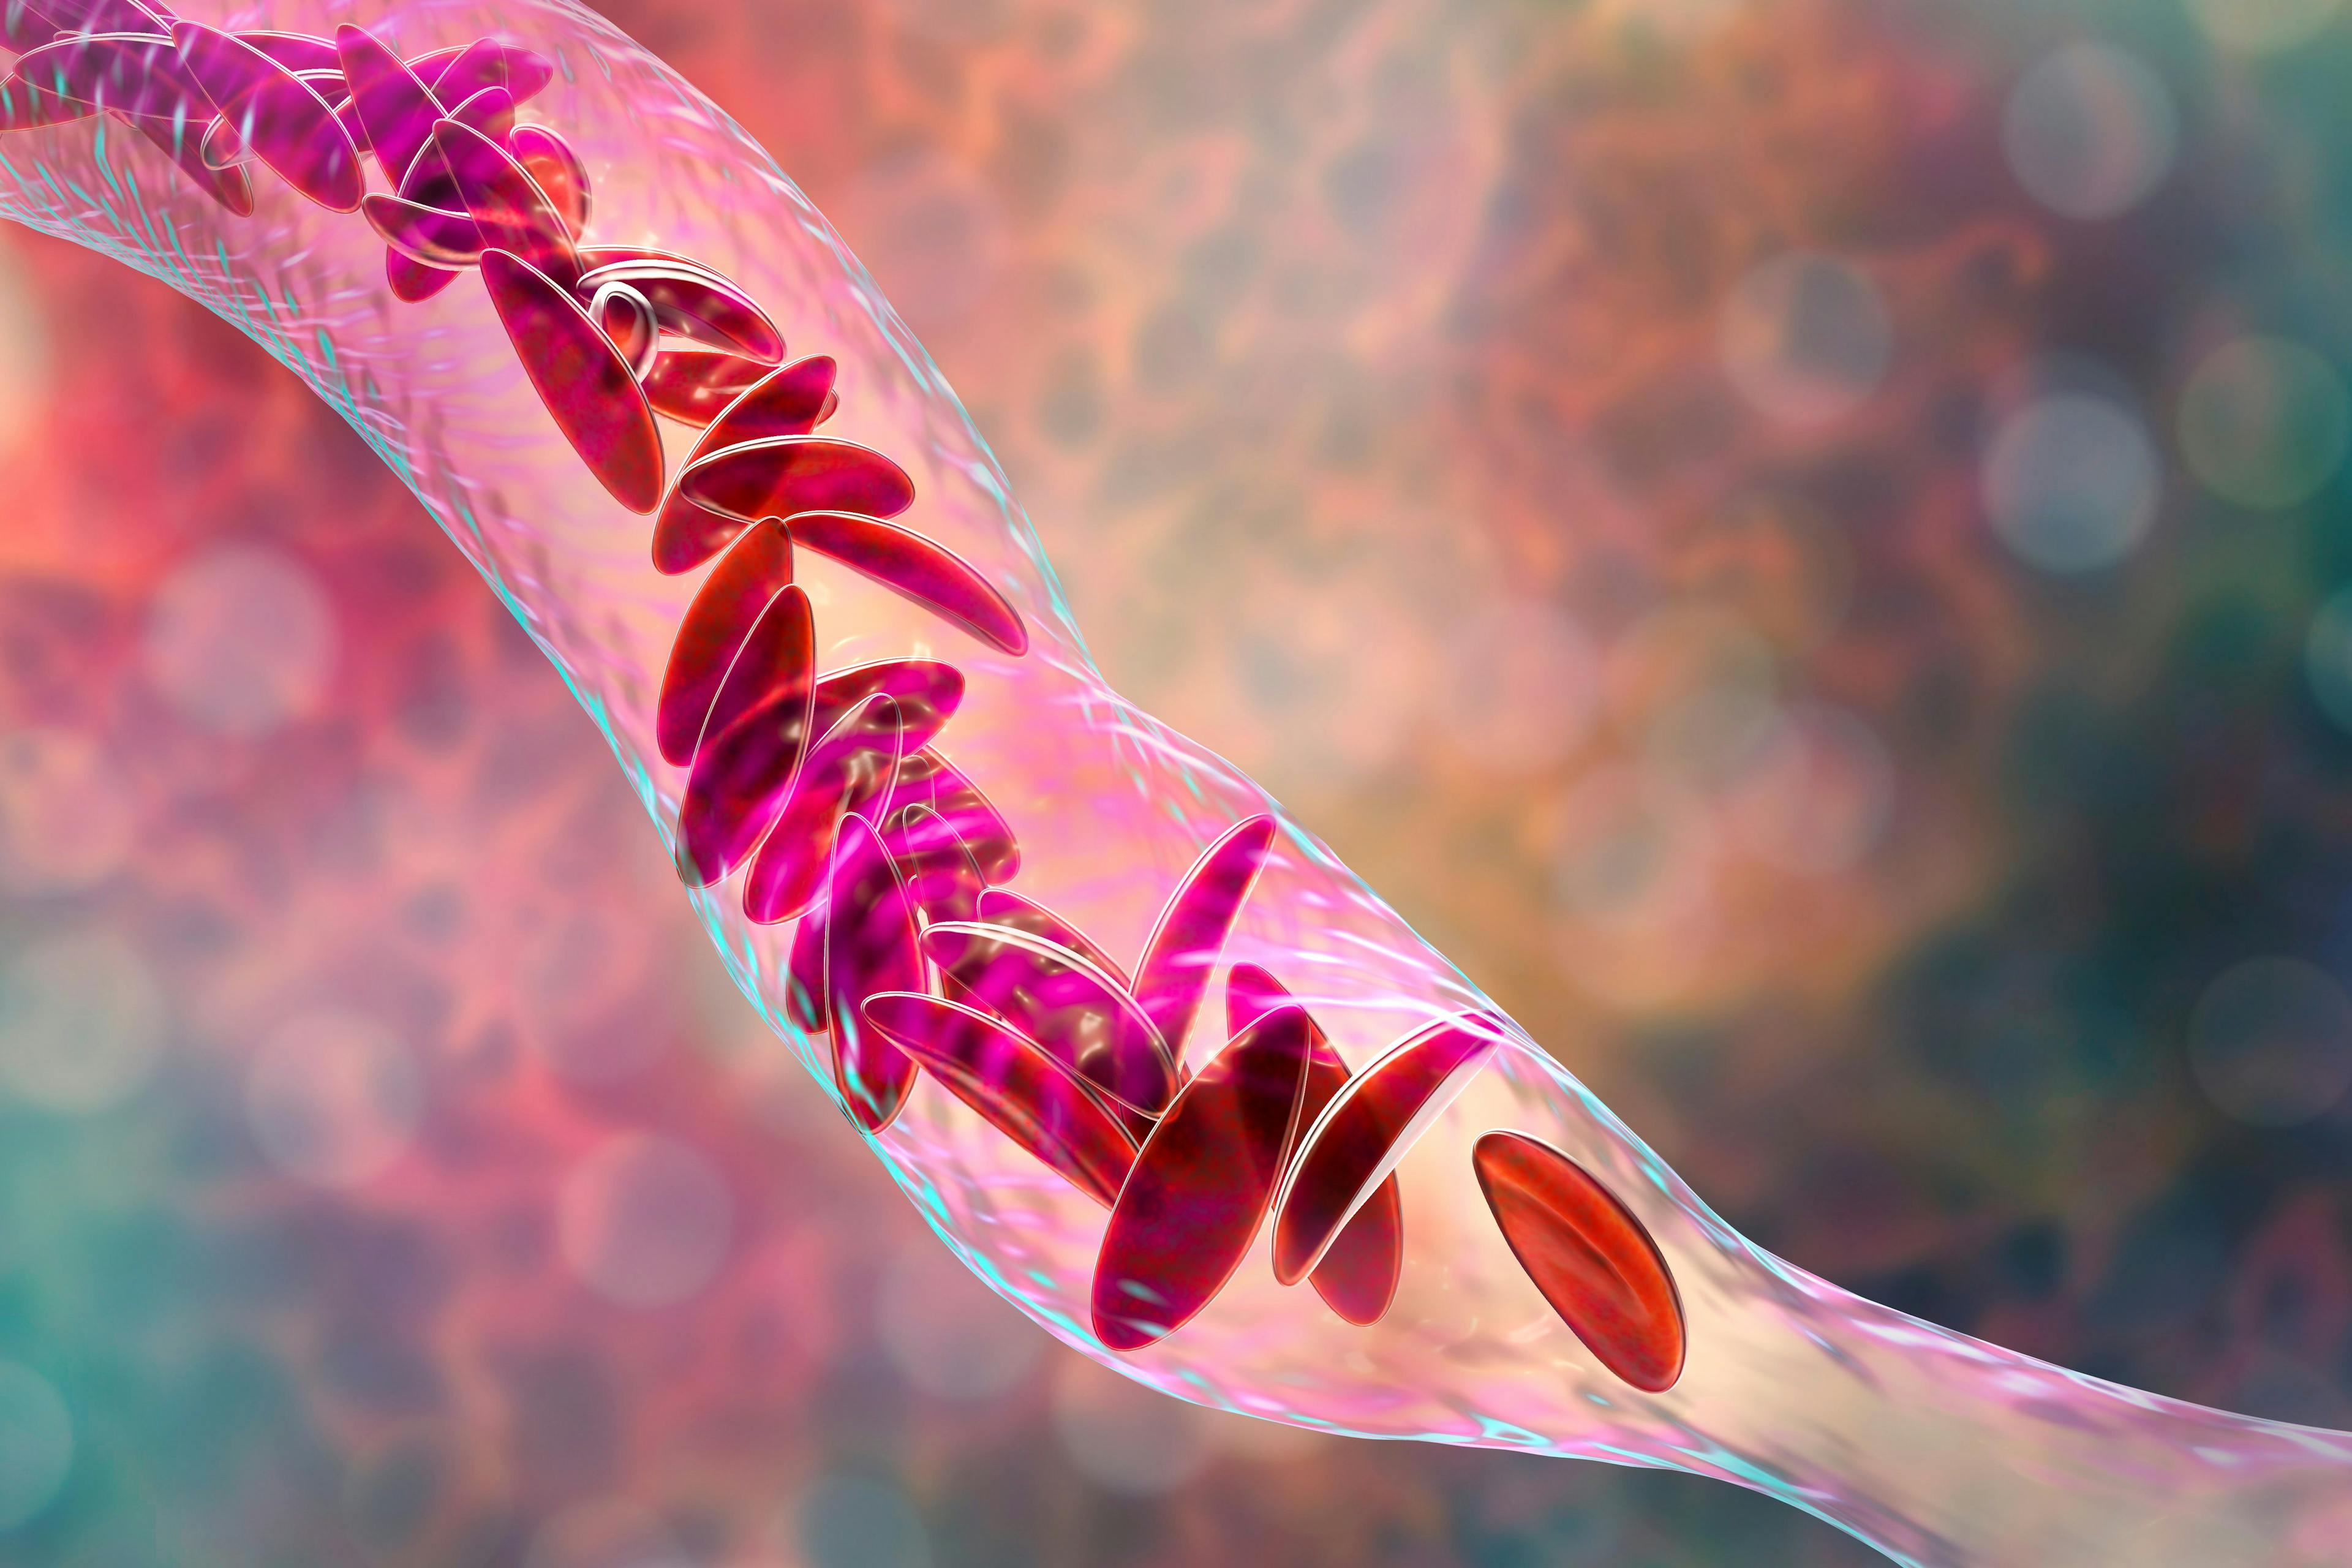 Clumps of sickle cells block the blood vessel | Image credit: Dr_Microbe - stock.adobe.com